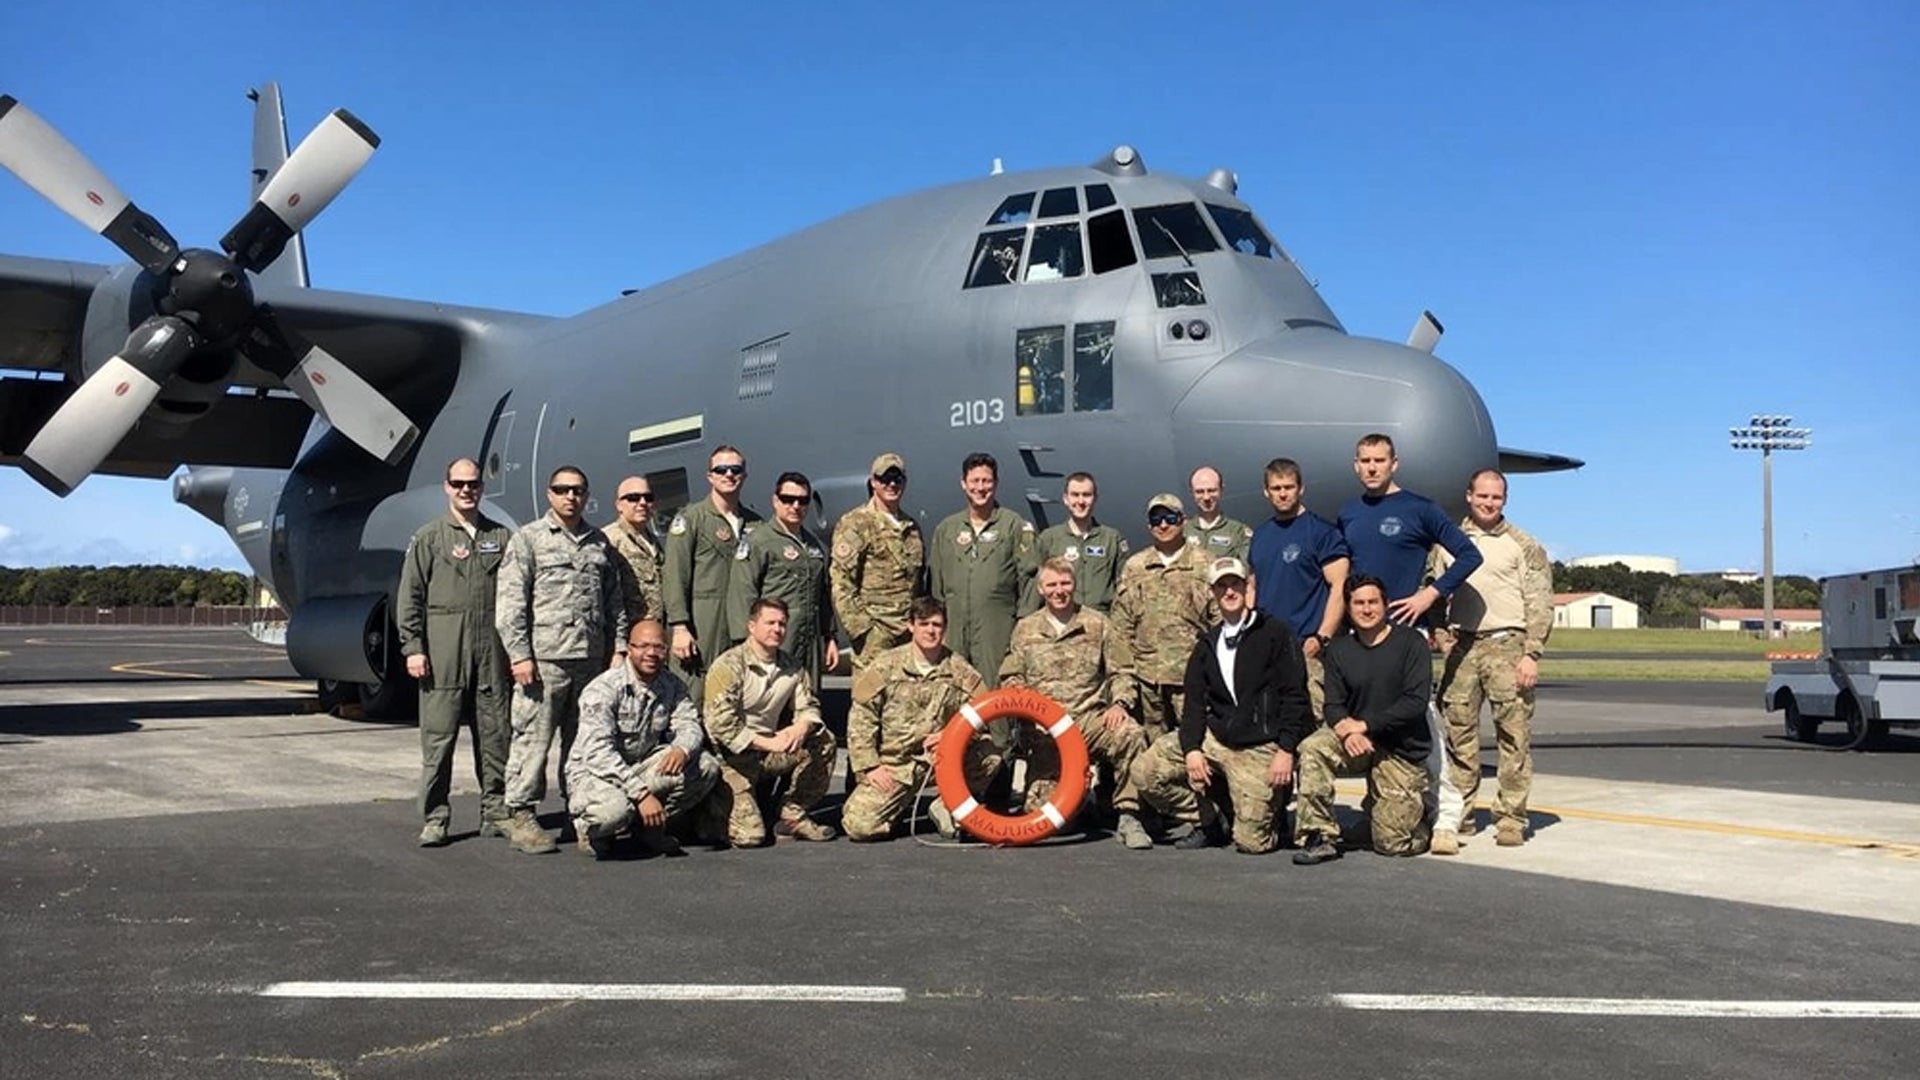 Members of the New York Air National Guard’s 106th Rescue Wing who worked together to save two badly burned sailors on board the 625-foot long bulk cargo carrier Tamar pose for a picture in front of their HC-130 search and rescue aircraft at Lajes Field in the Azores on April 28, 2017. (U.S. Air Force courtesy photo)